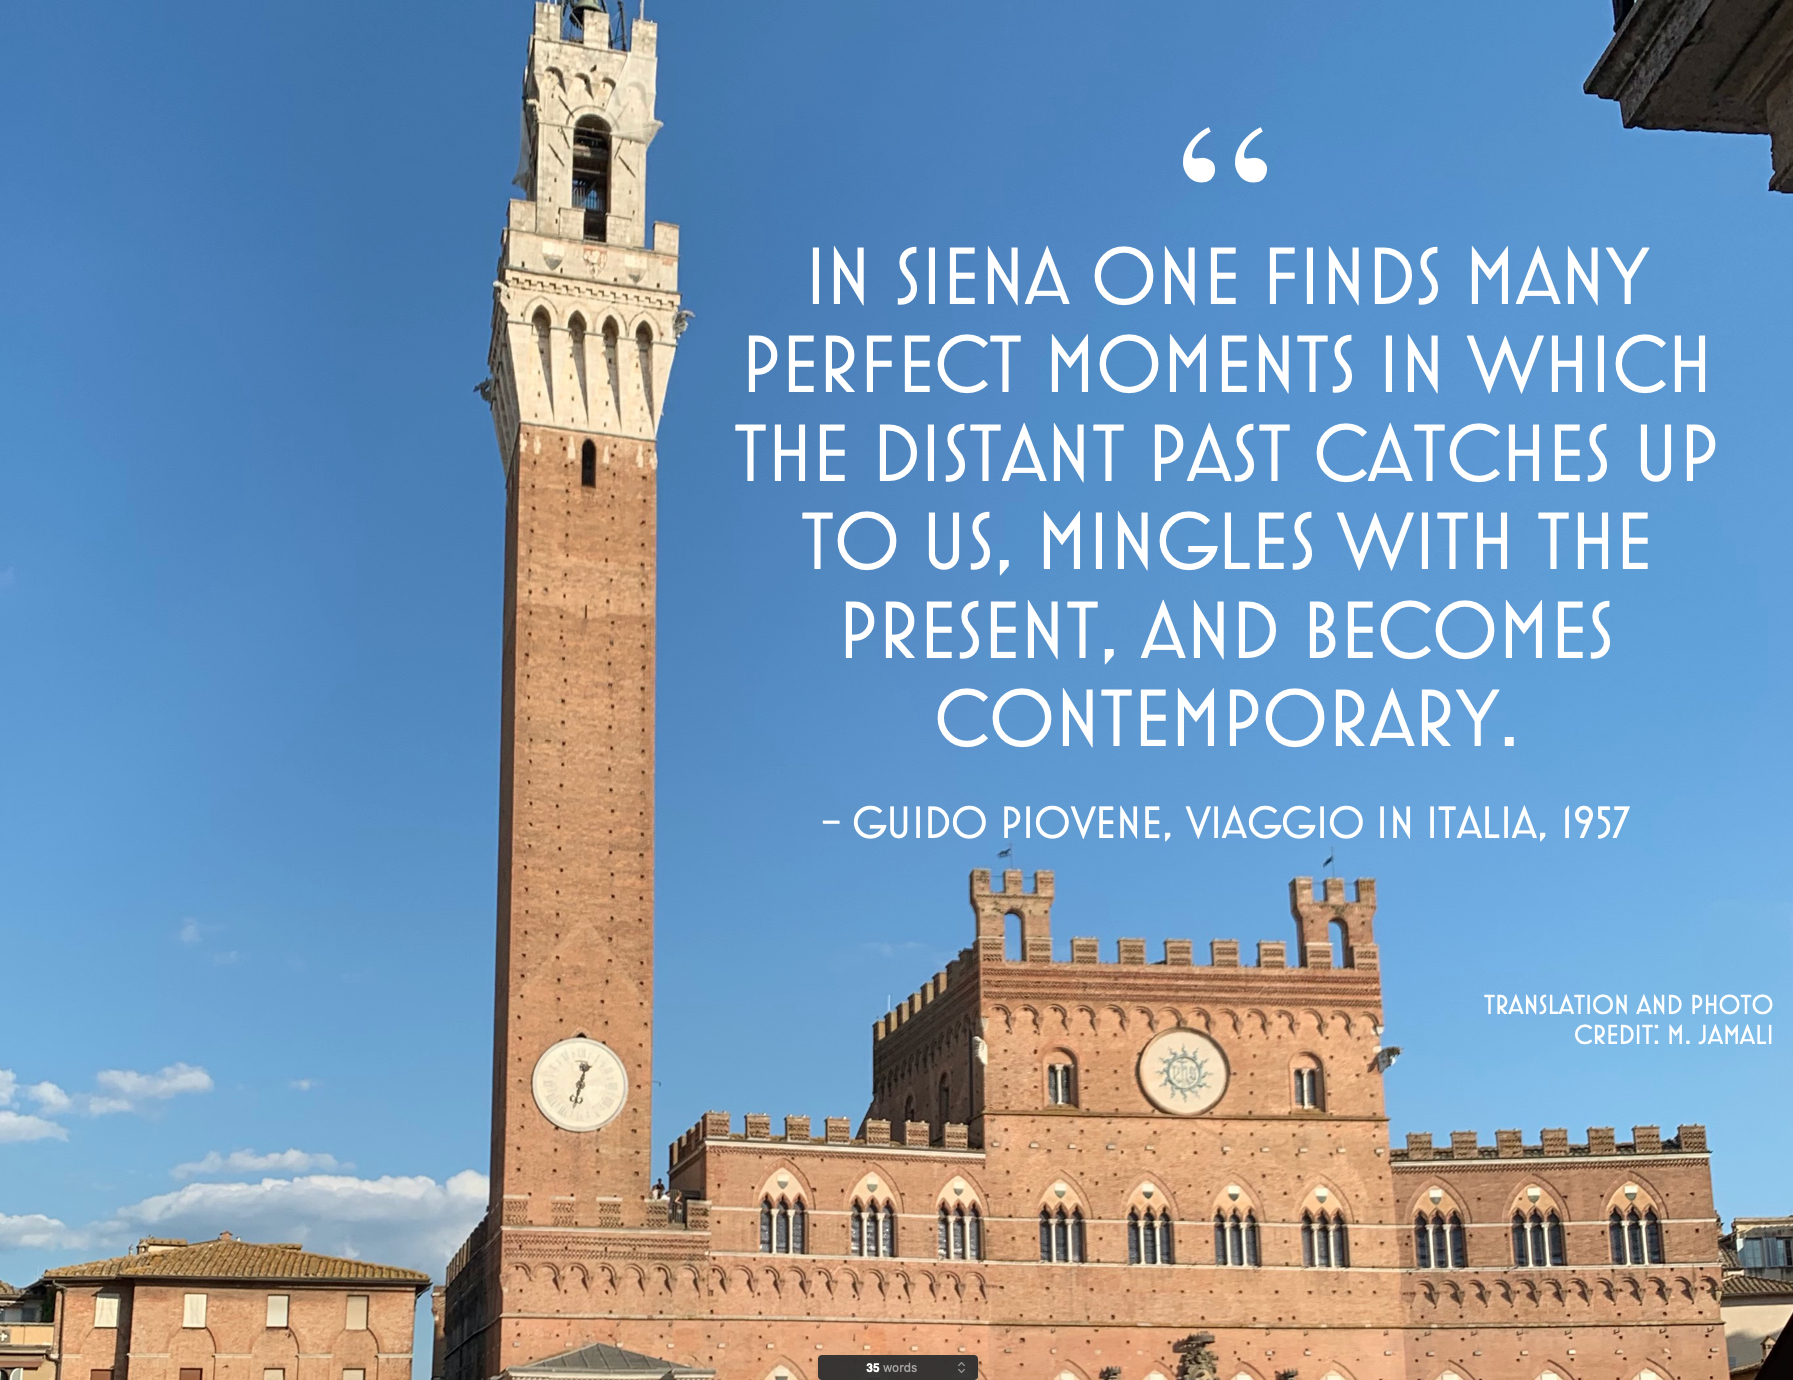 Building in Siena with text on image: In Siena one finds many perfect moments in which the distant past catches up to us, mingles with the present, and becomes contemporary. Photo credit M Jamali; Design by G. Lisena